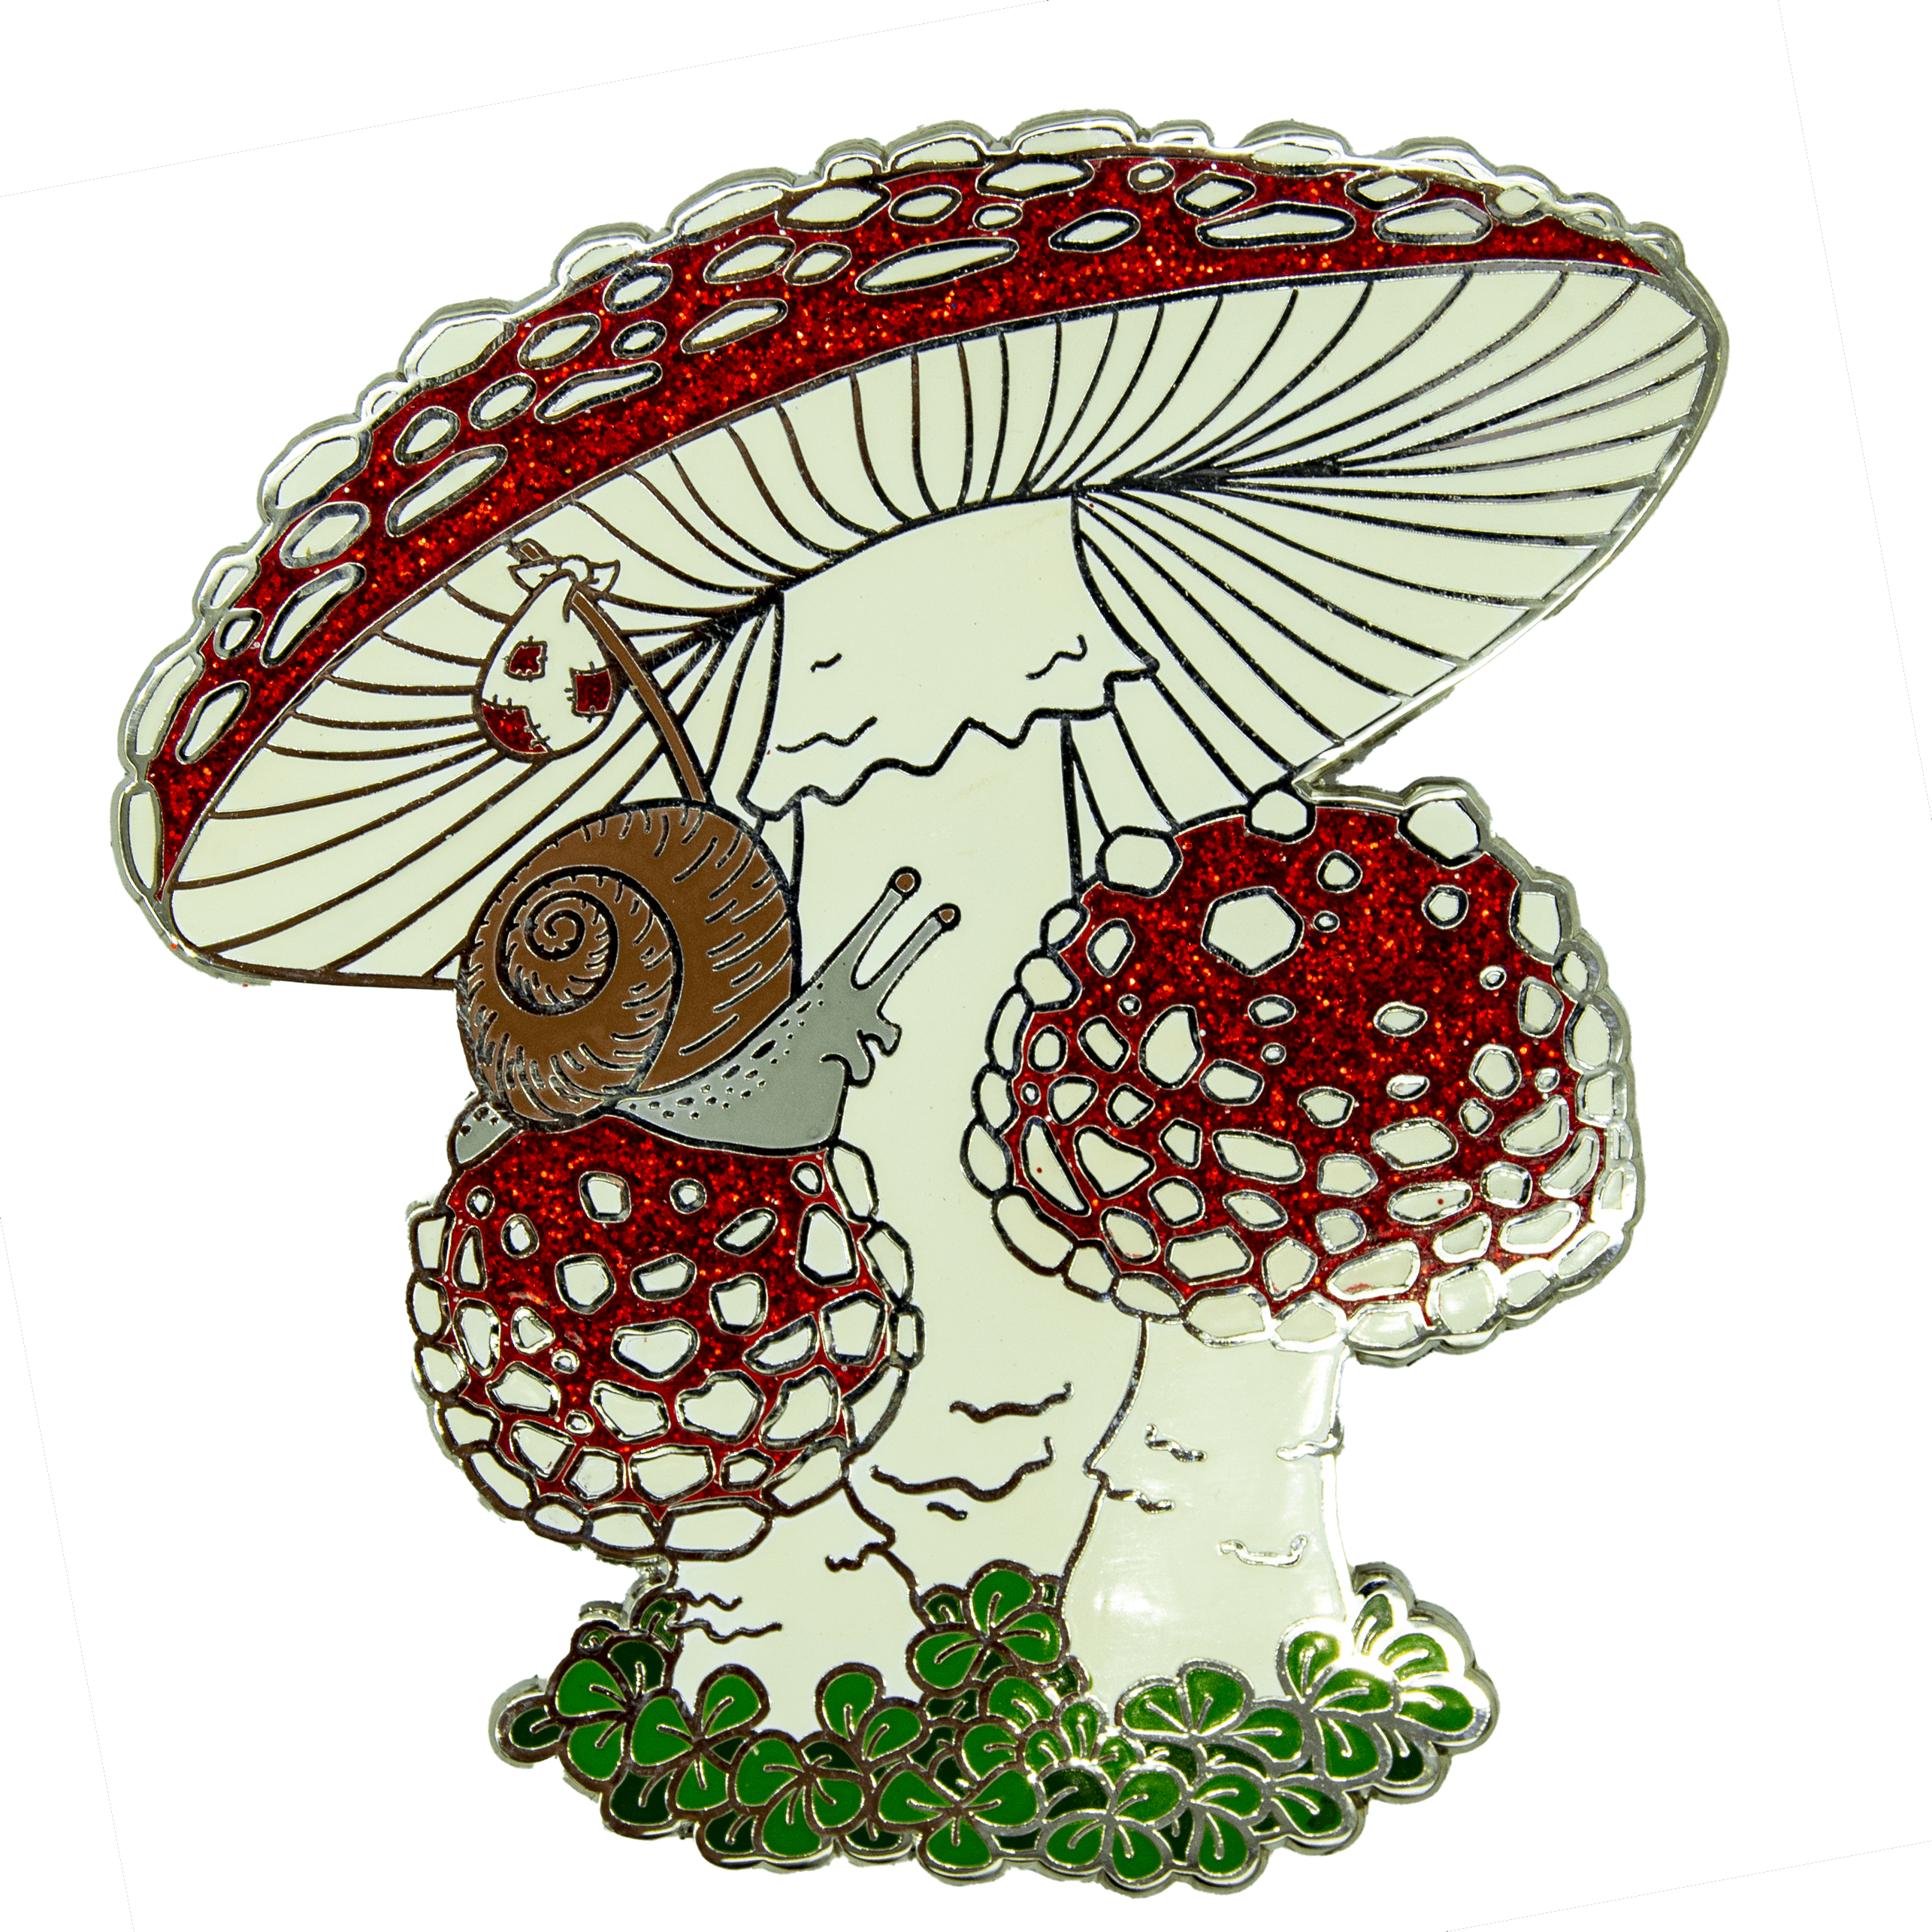 Gold 18-month Pin v1 - "Agaric Adventures"